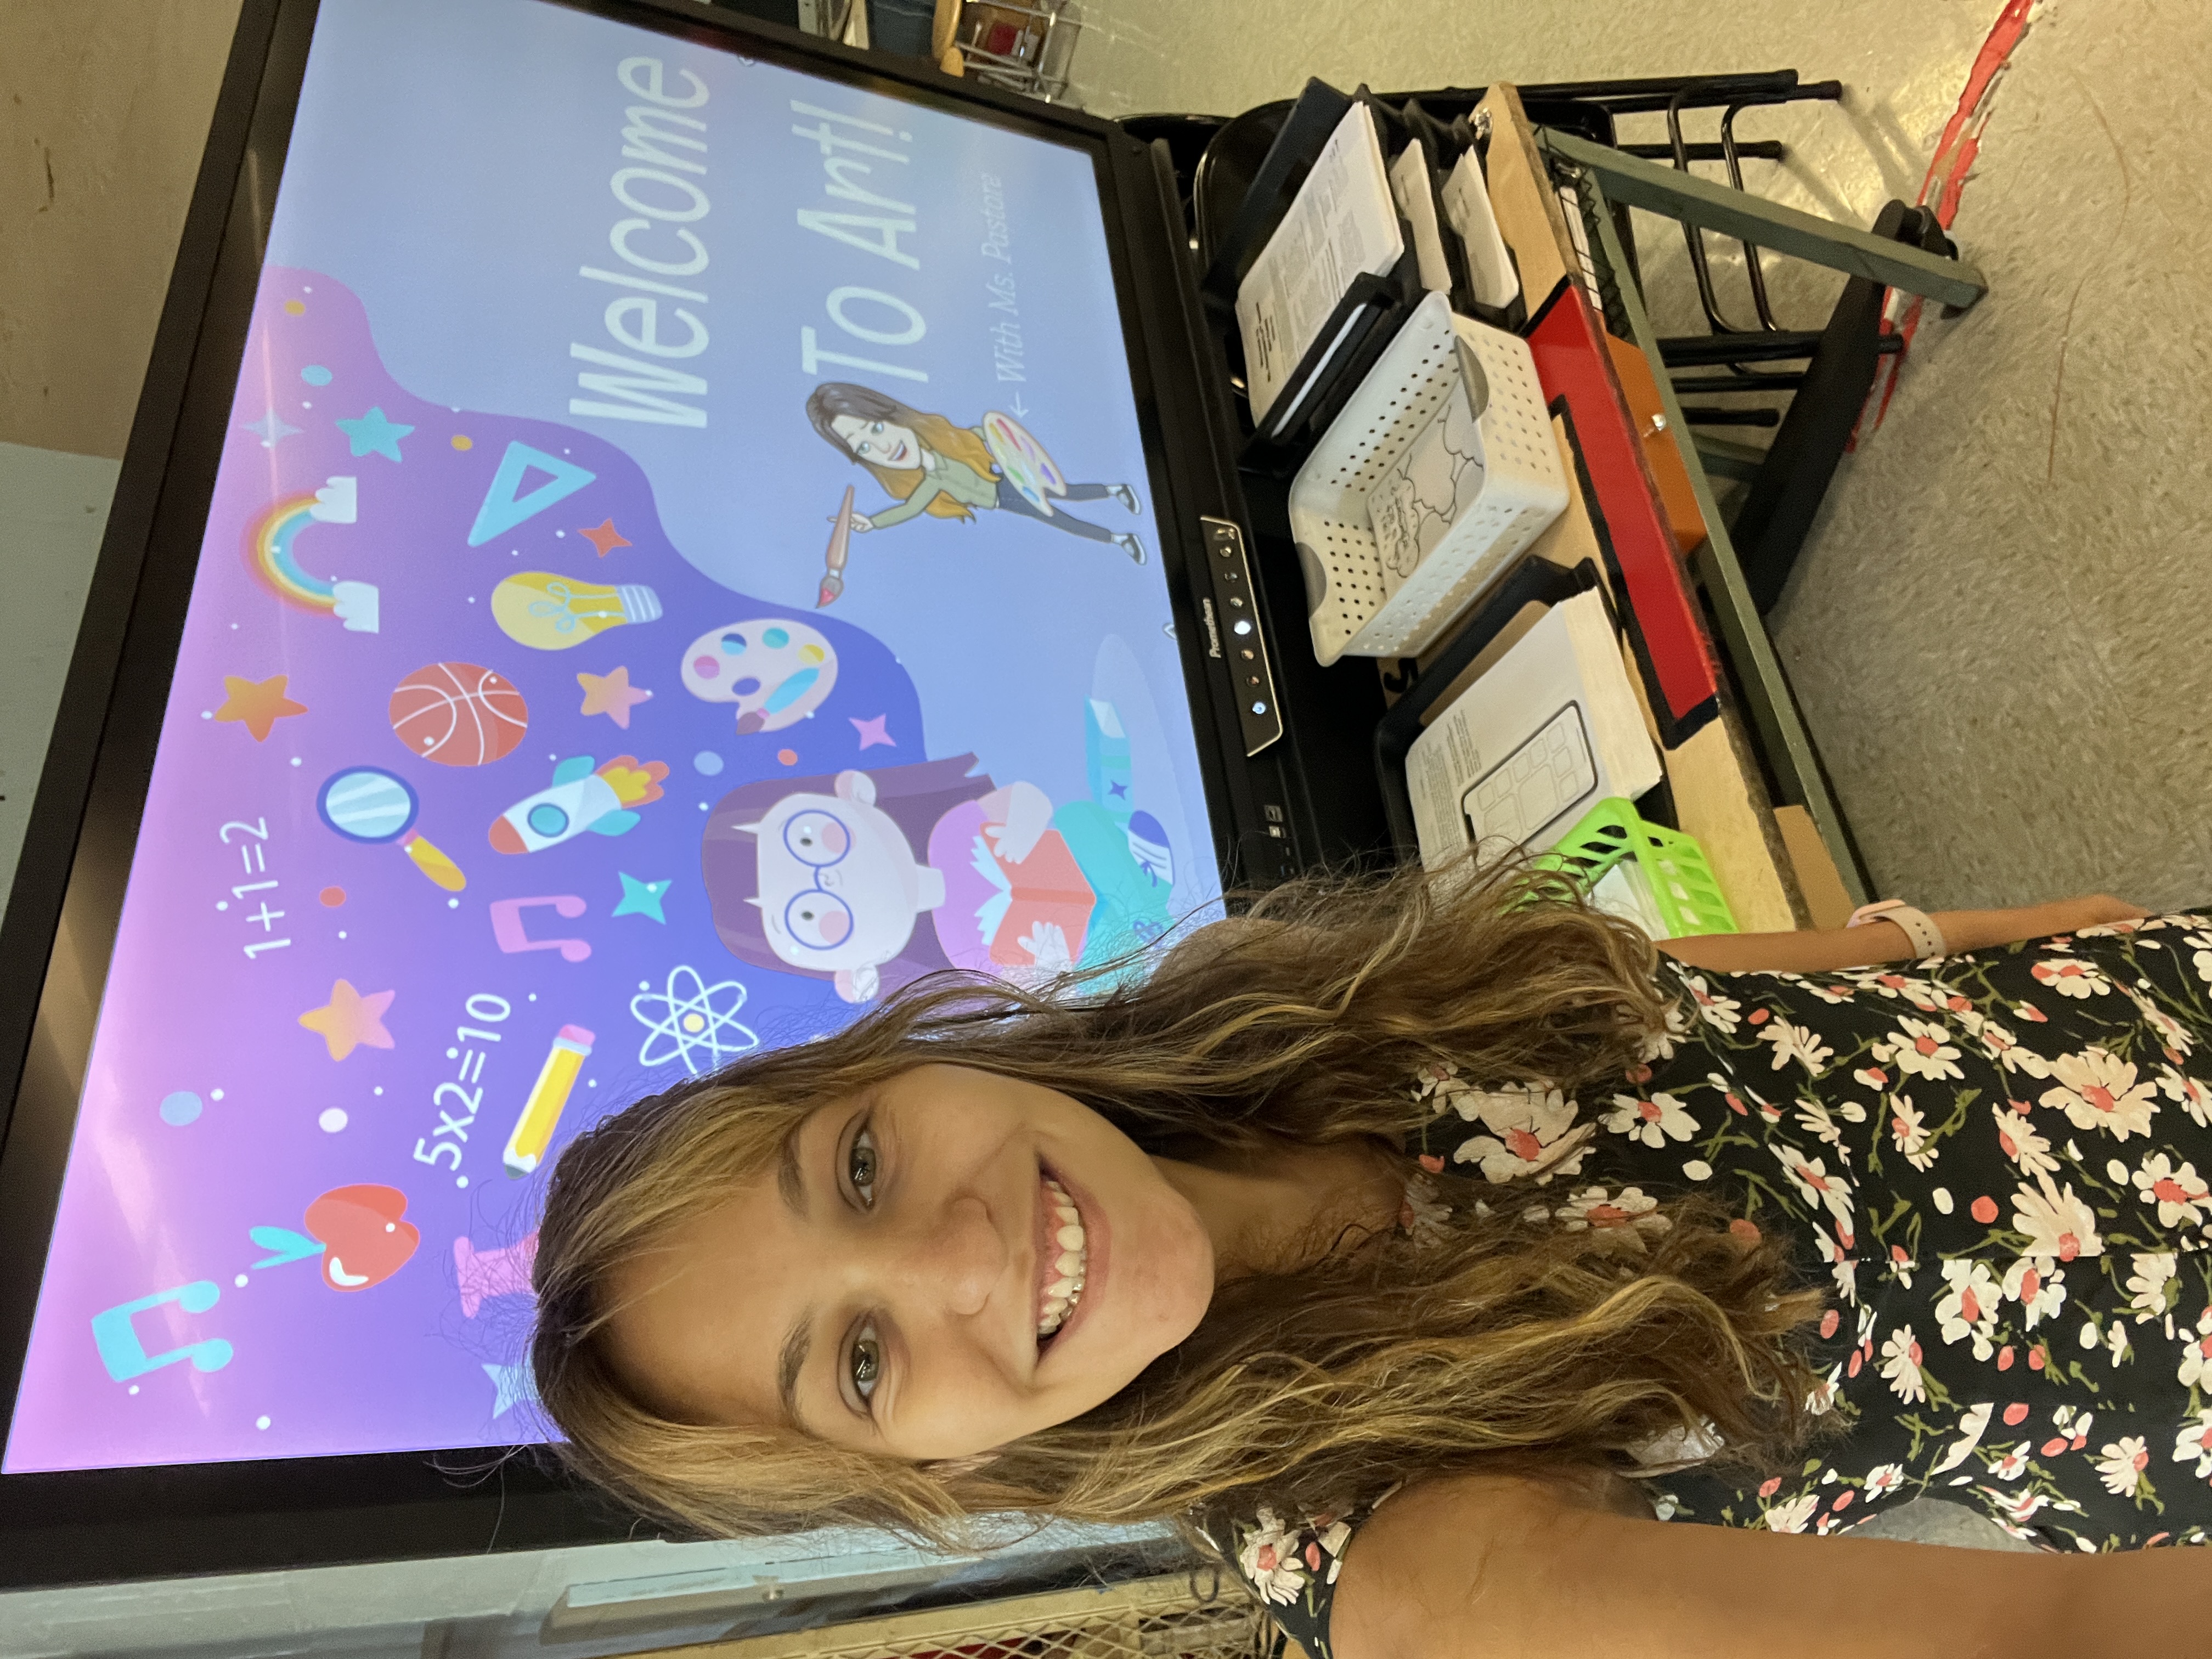 smiling young woman in an art classroom in front of a large screen